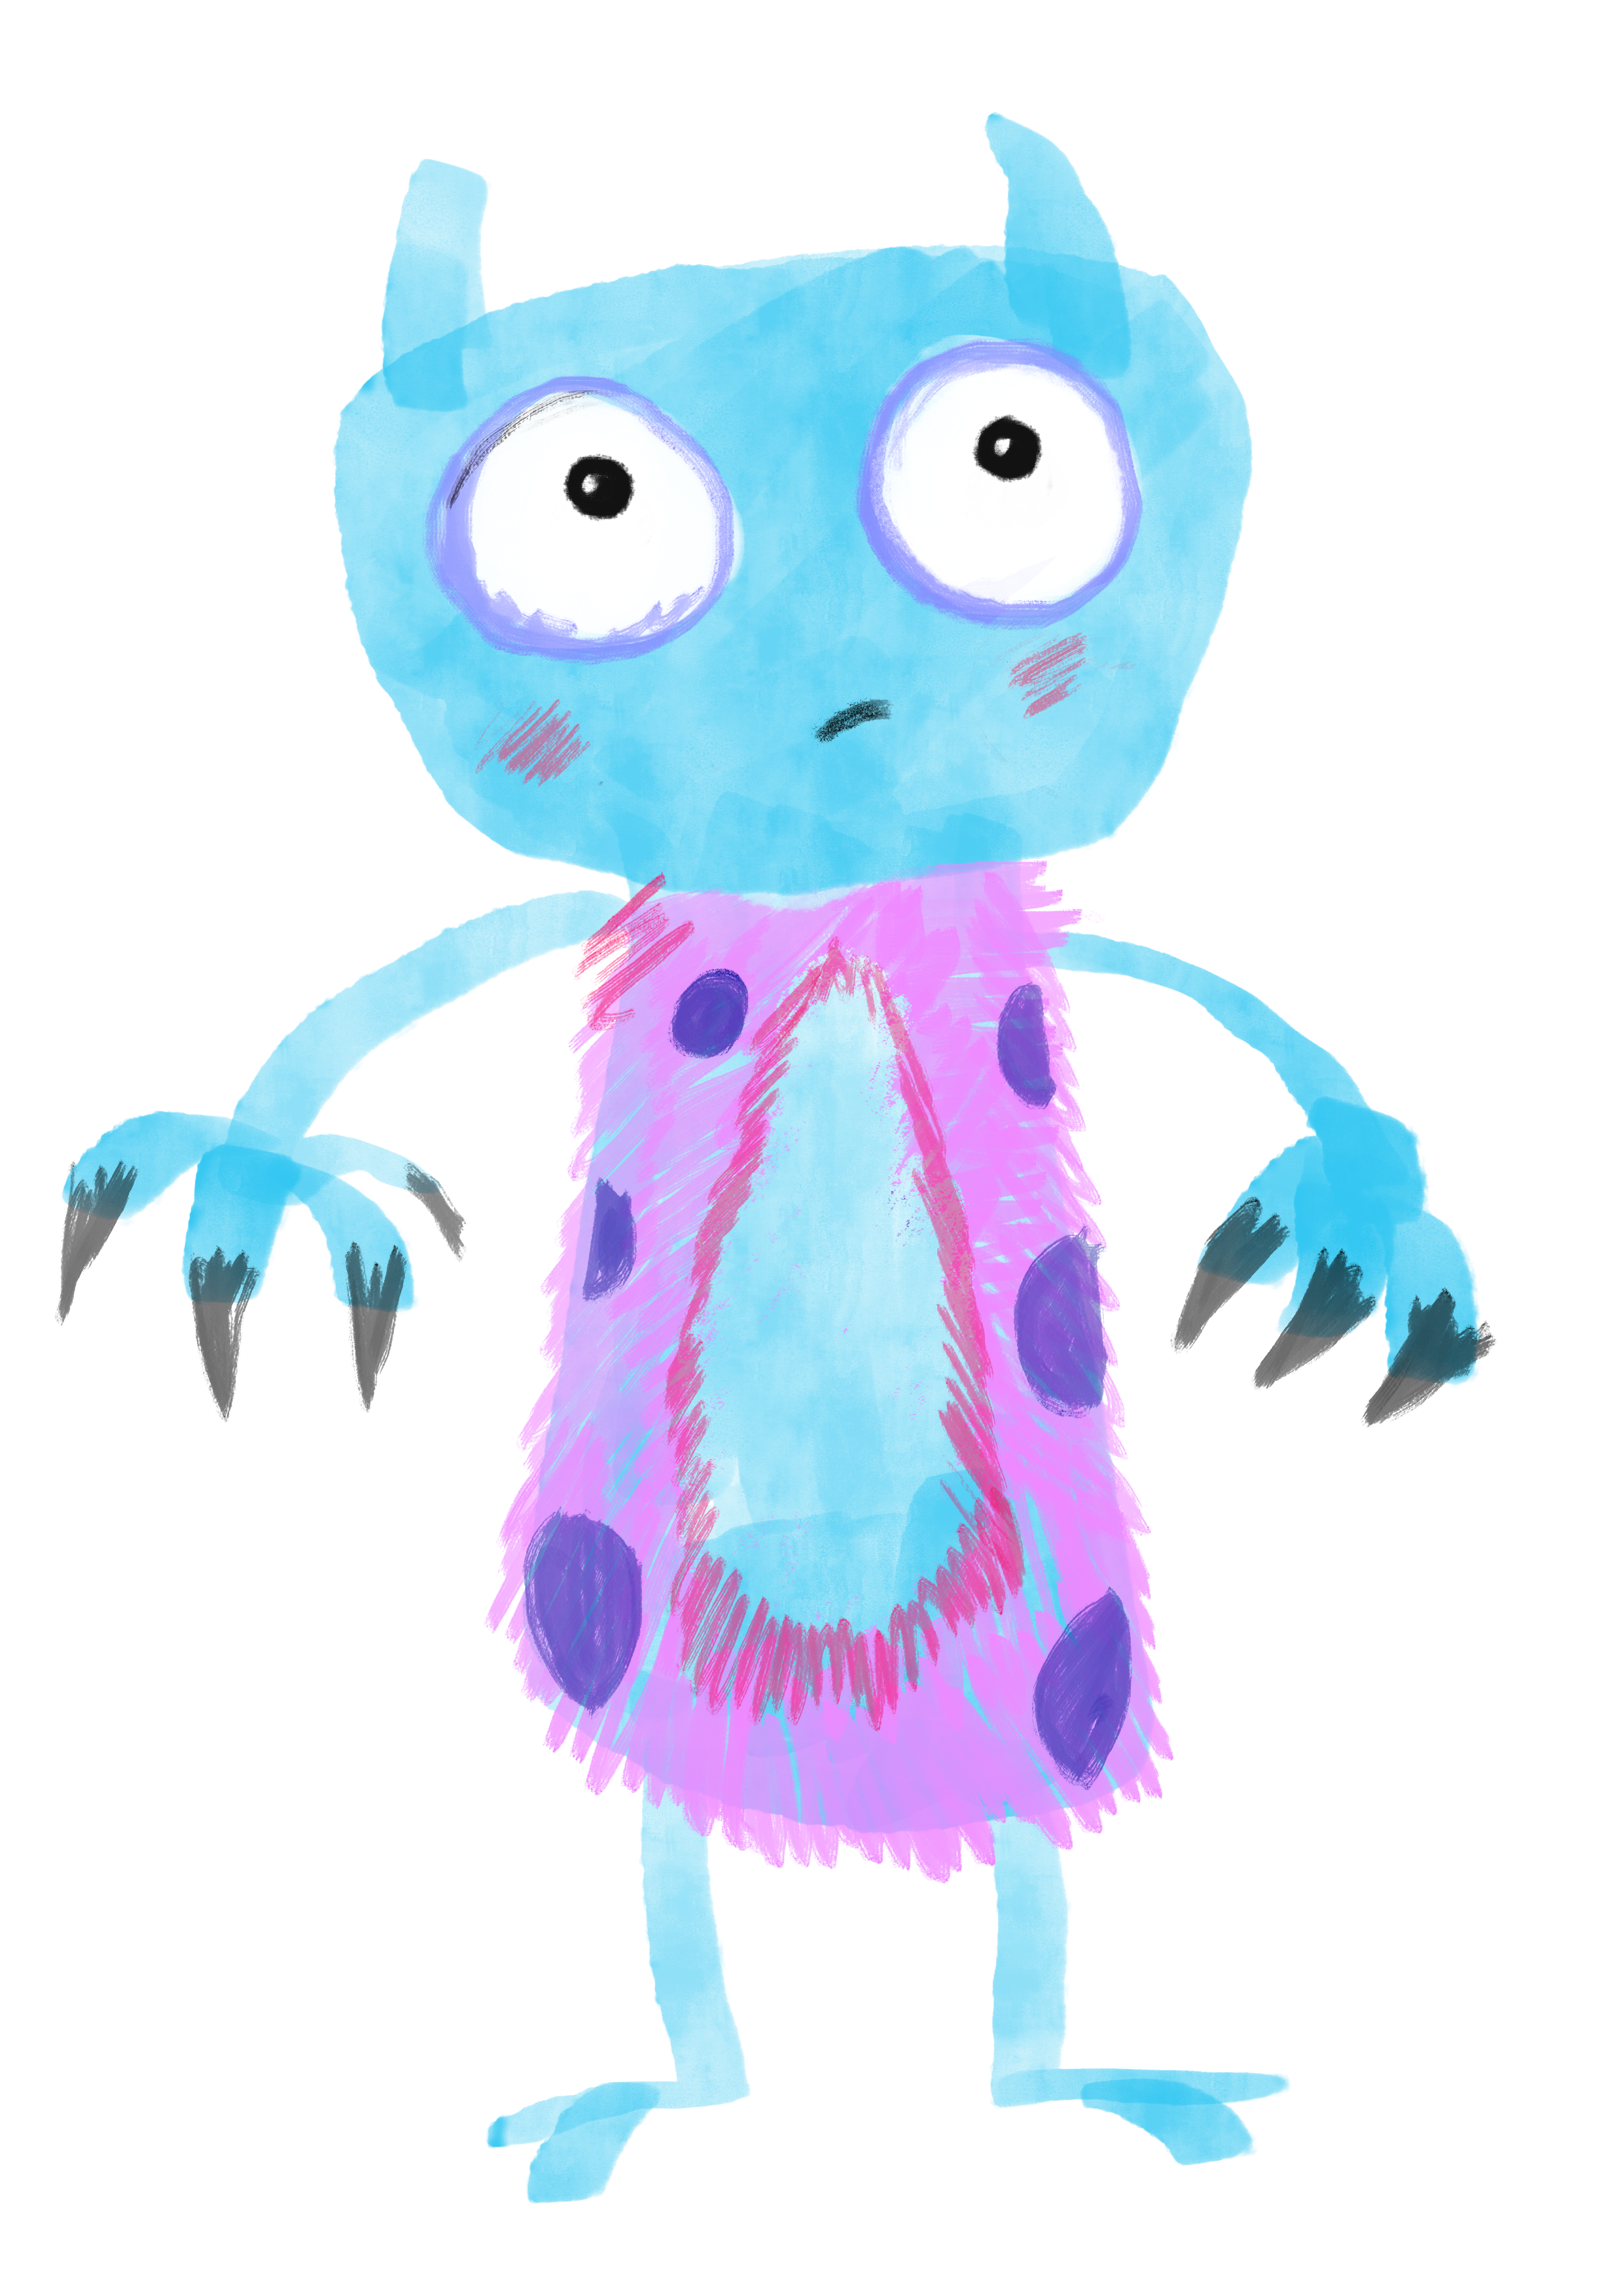 An image of the worry Monster; A light-blue, friendly looking critter with a purple-and-pink polka-dot body